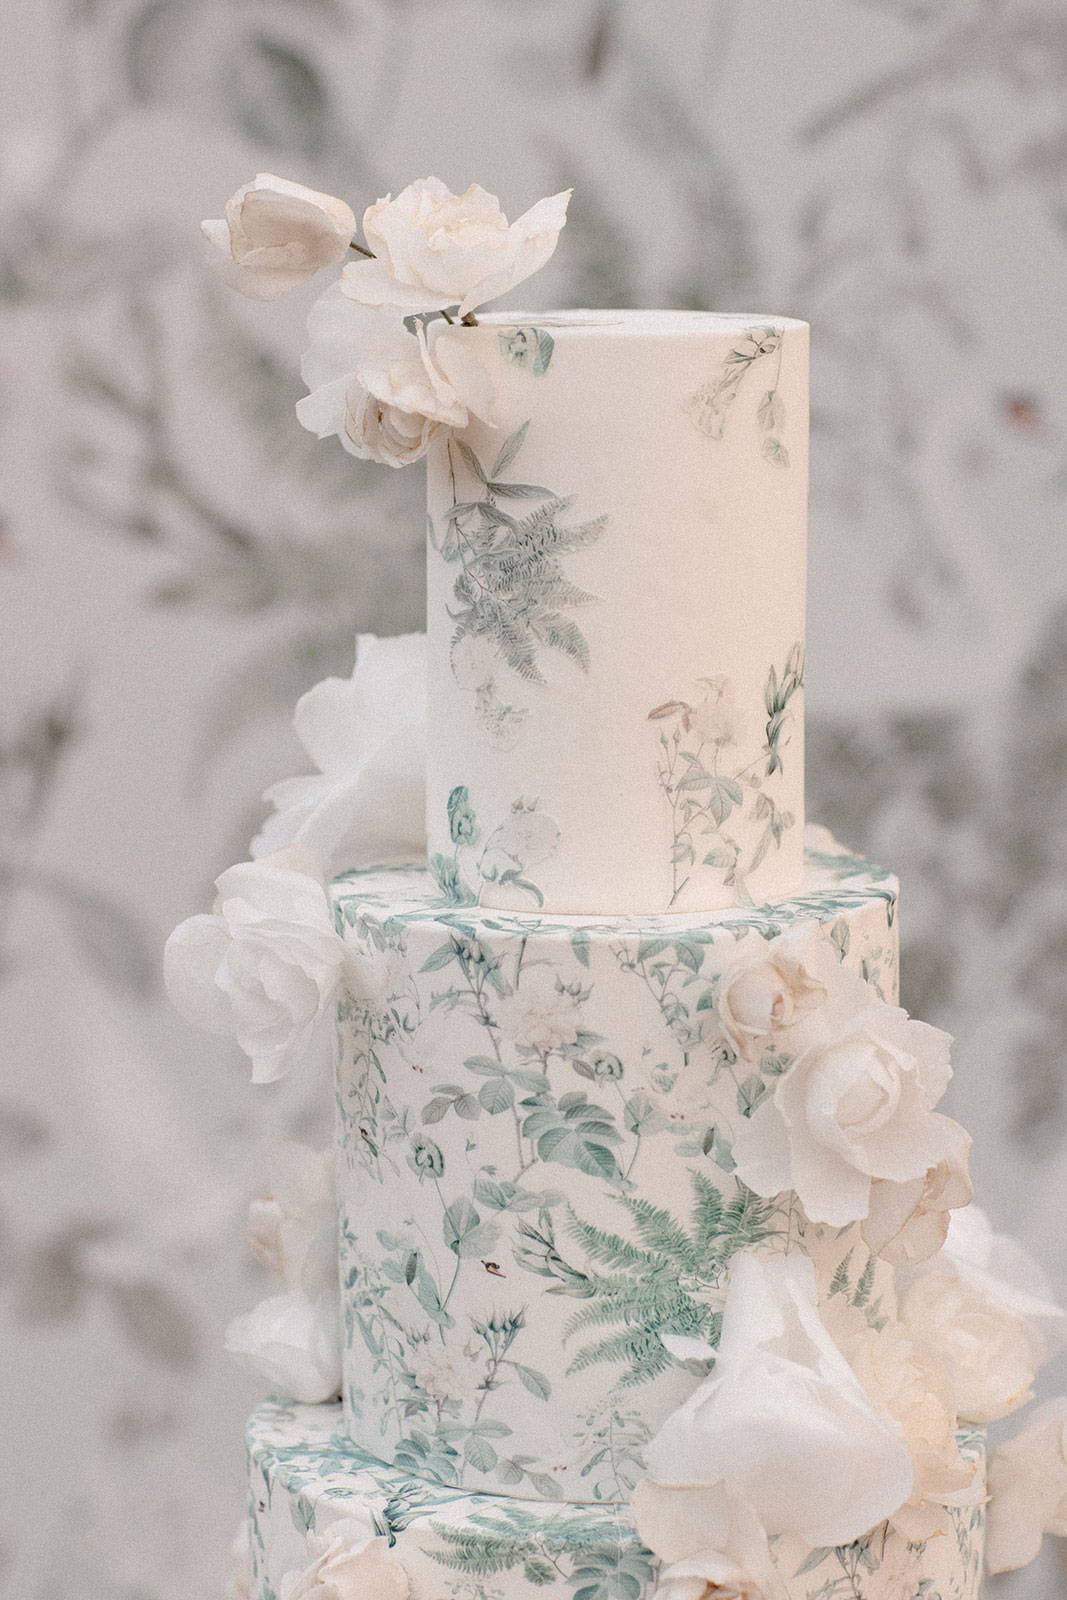 Blue and teal floral printed wedding cake